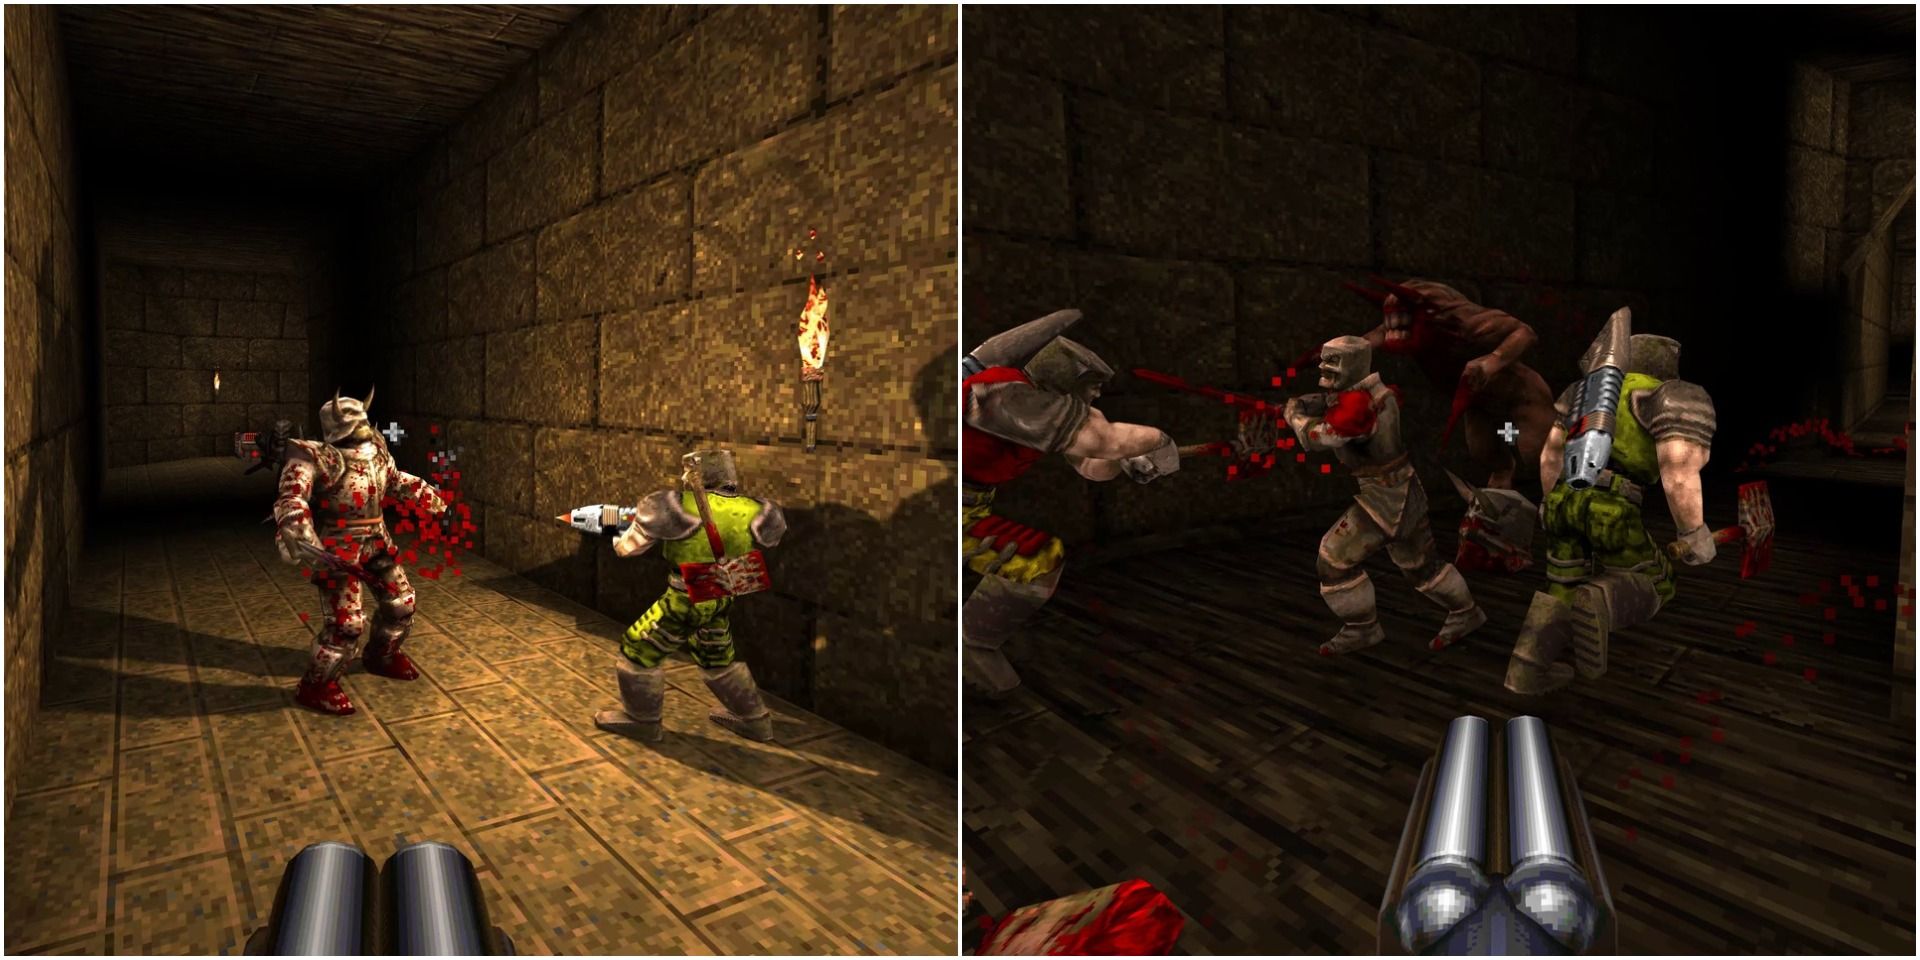 A collage showing gameplay from Quake